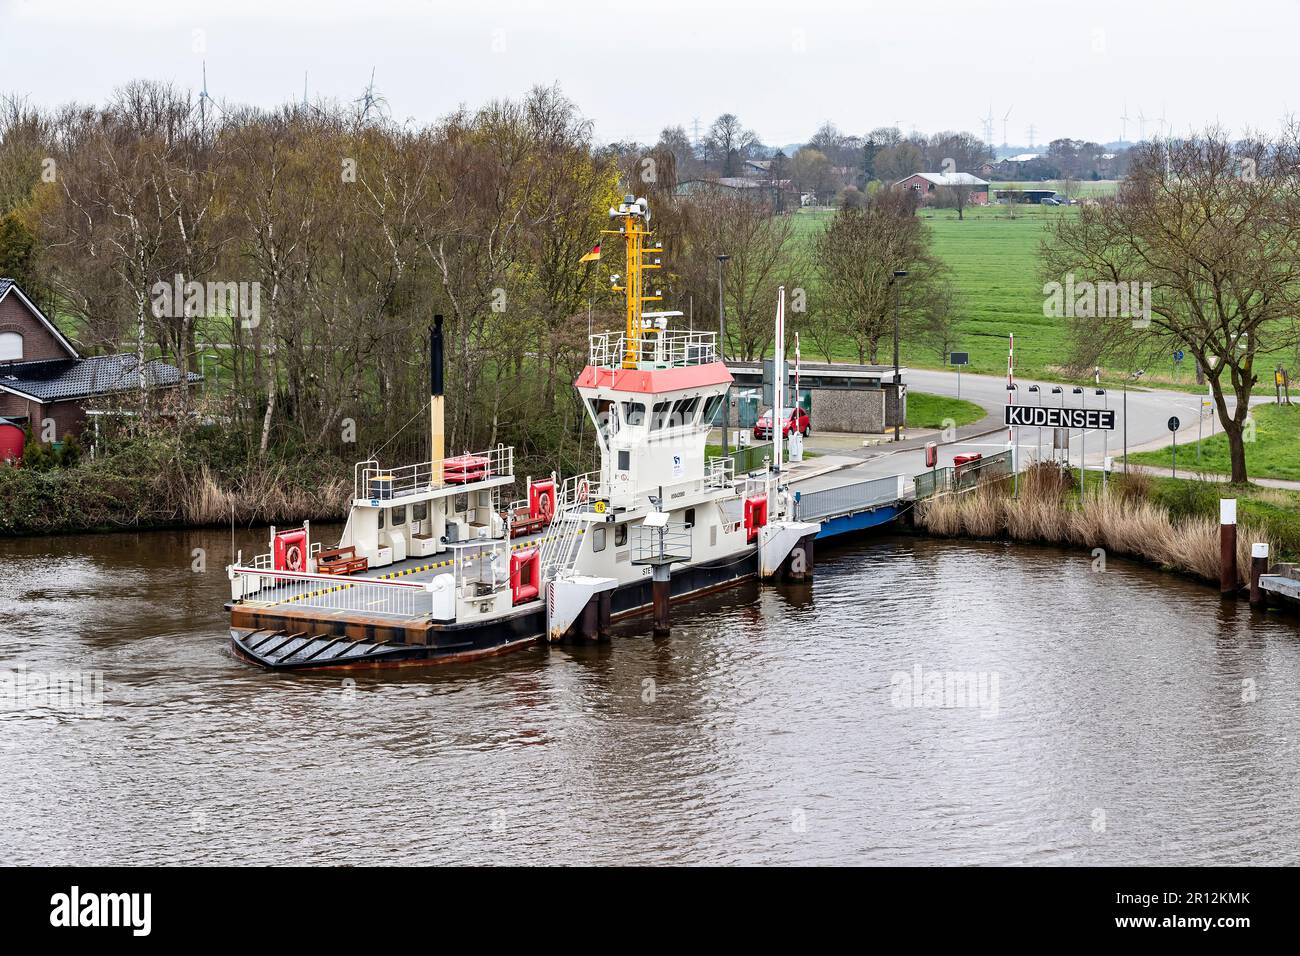 Stettin berthed at the ferry pt. Kudensee in the Kiel Canal, Germany Stock Photo